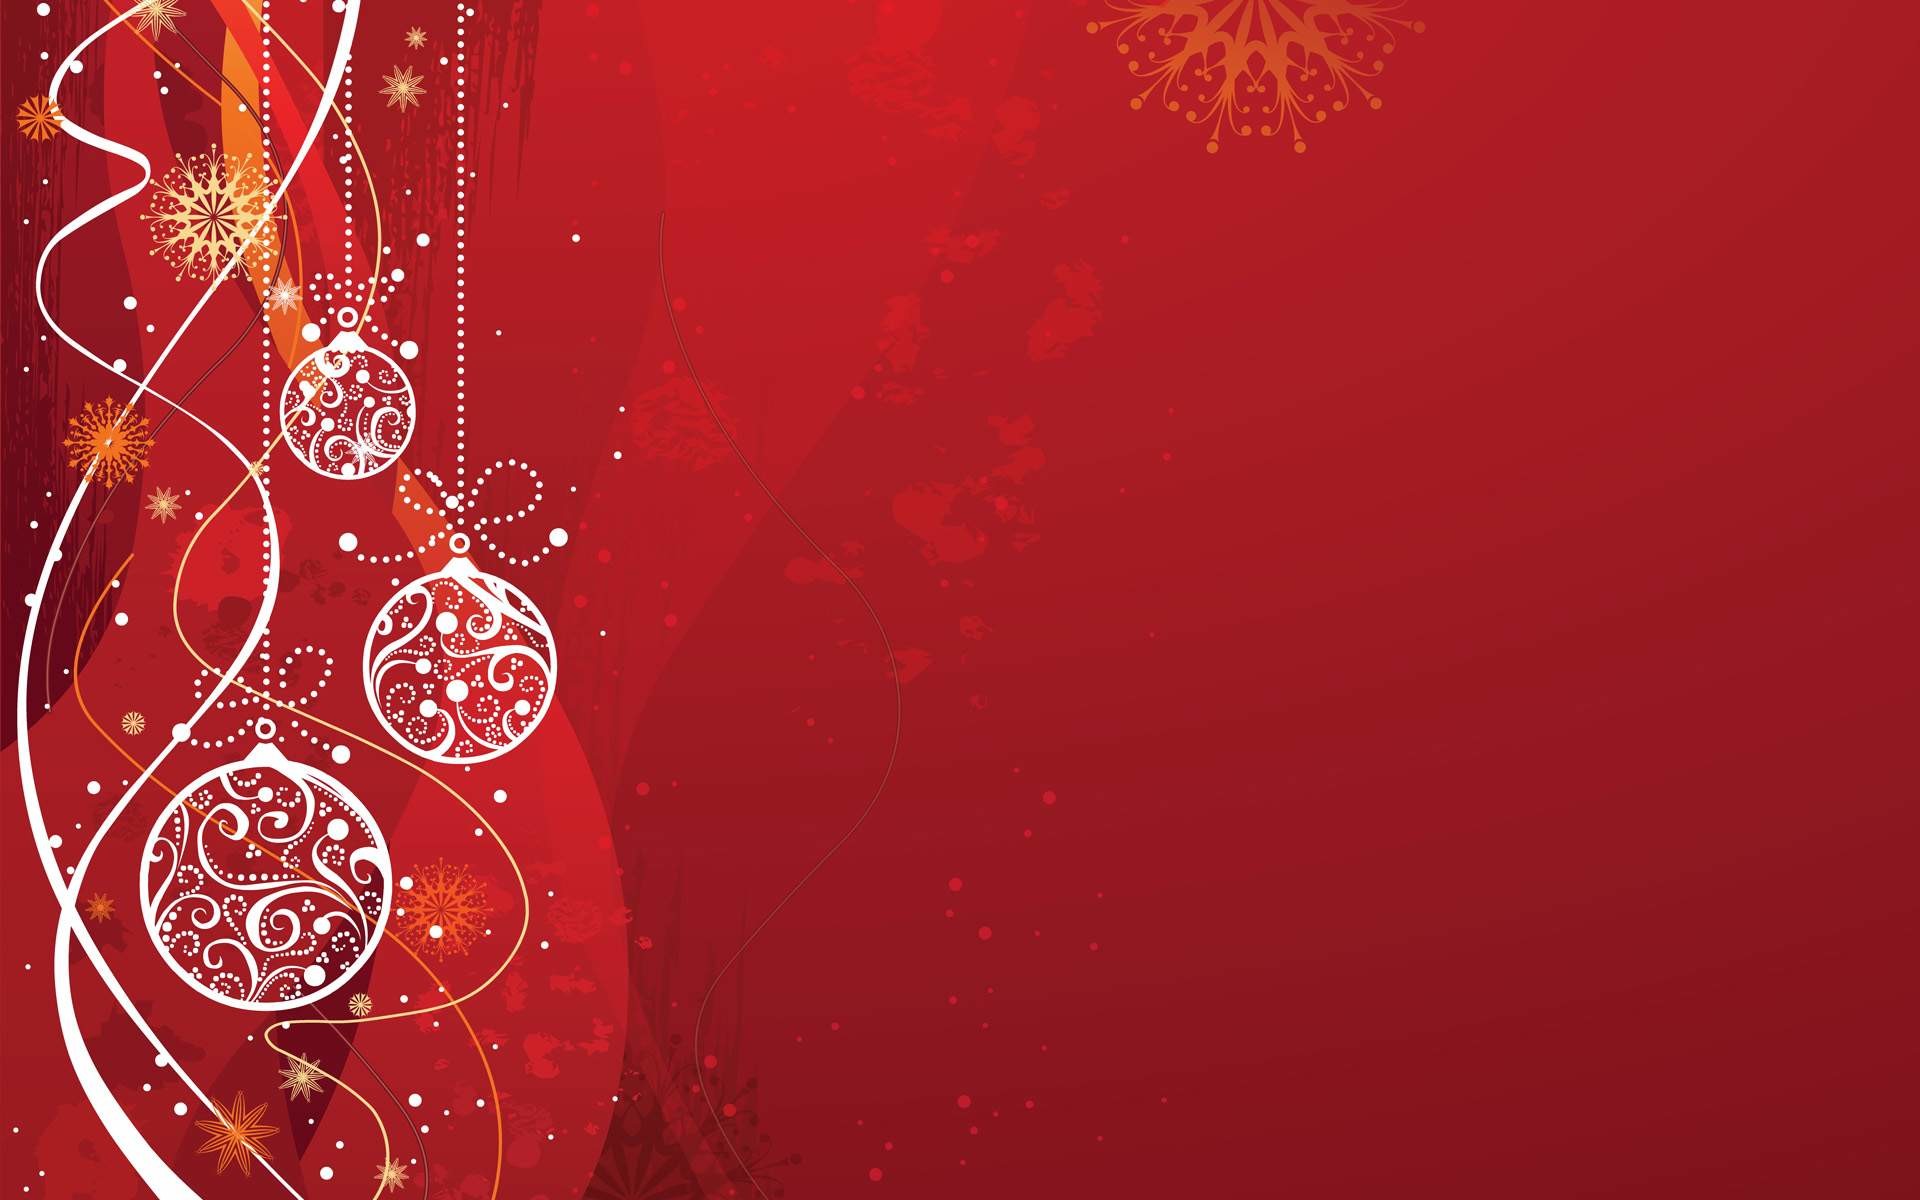 1920x1200 Most Downloaded Christmas Wallpapers - Full HD wallpaper search